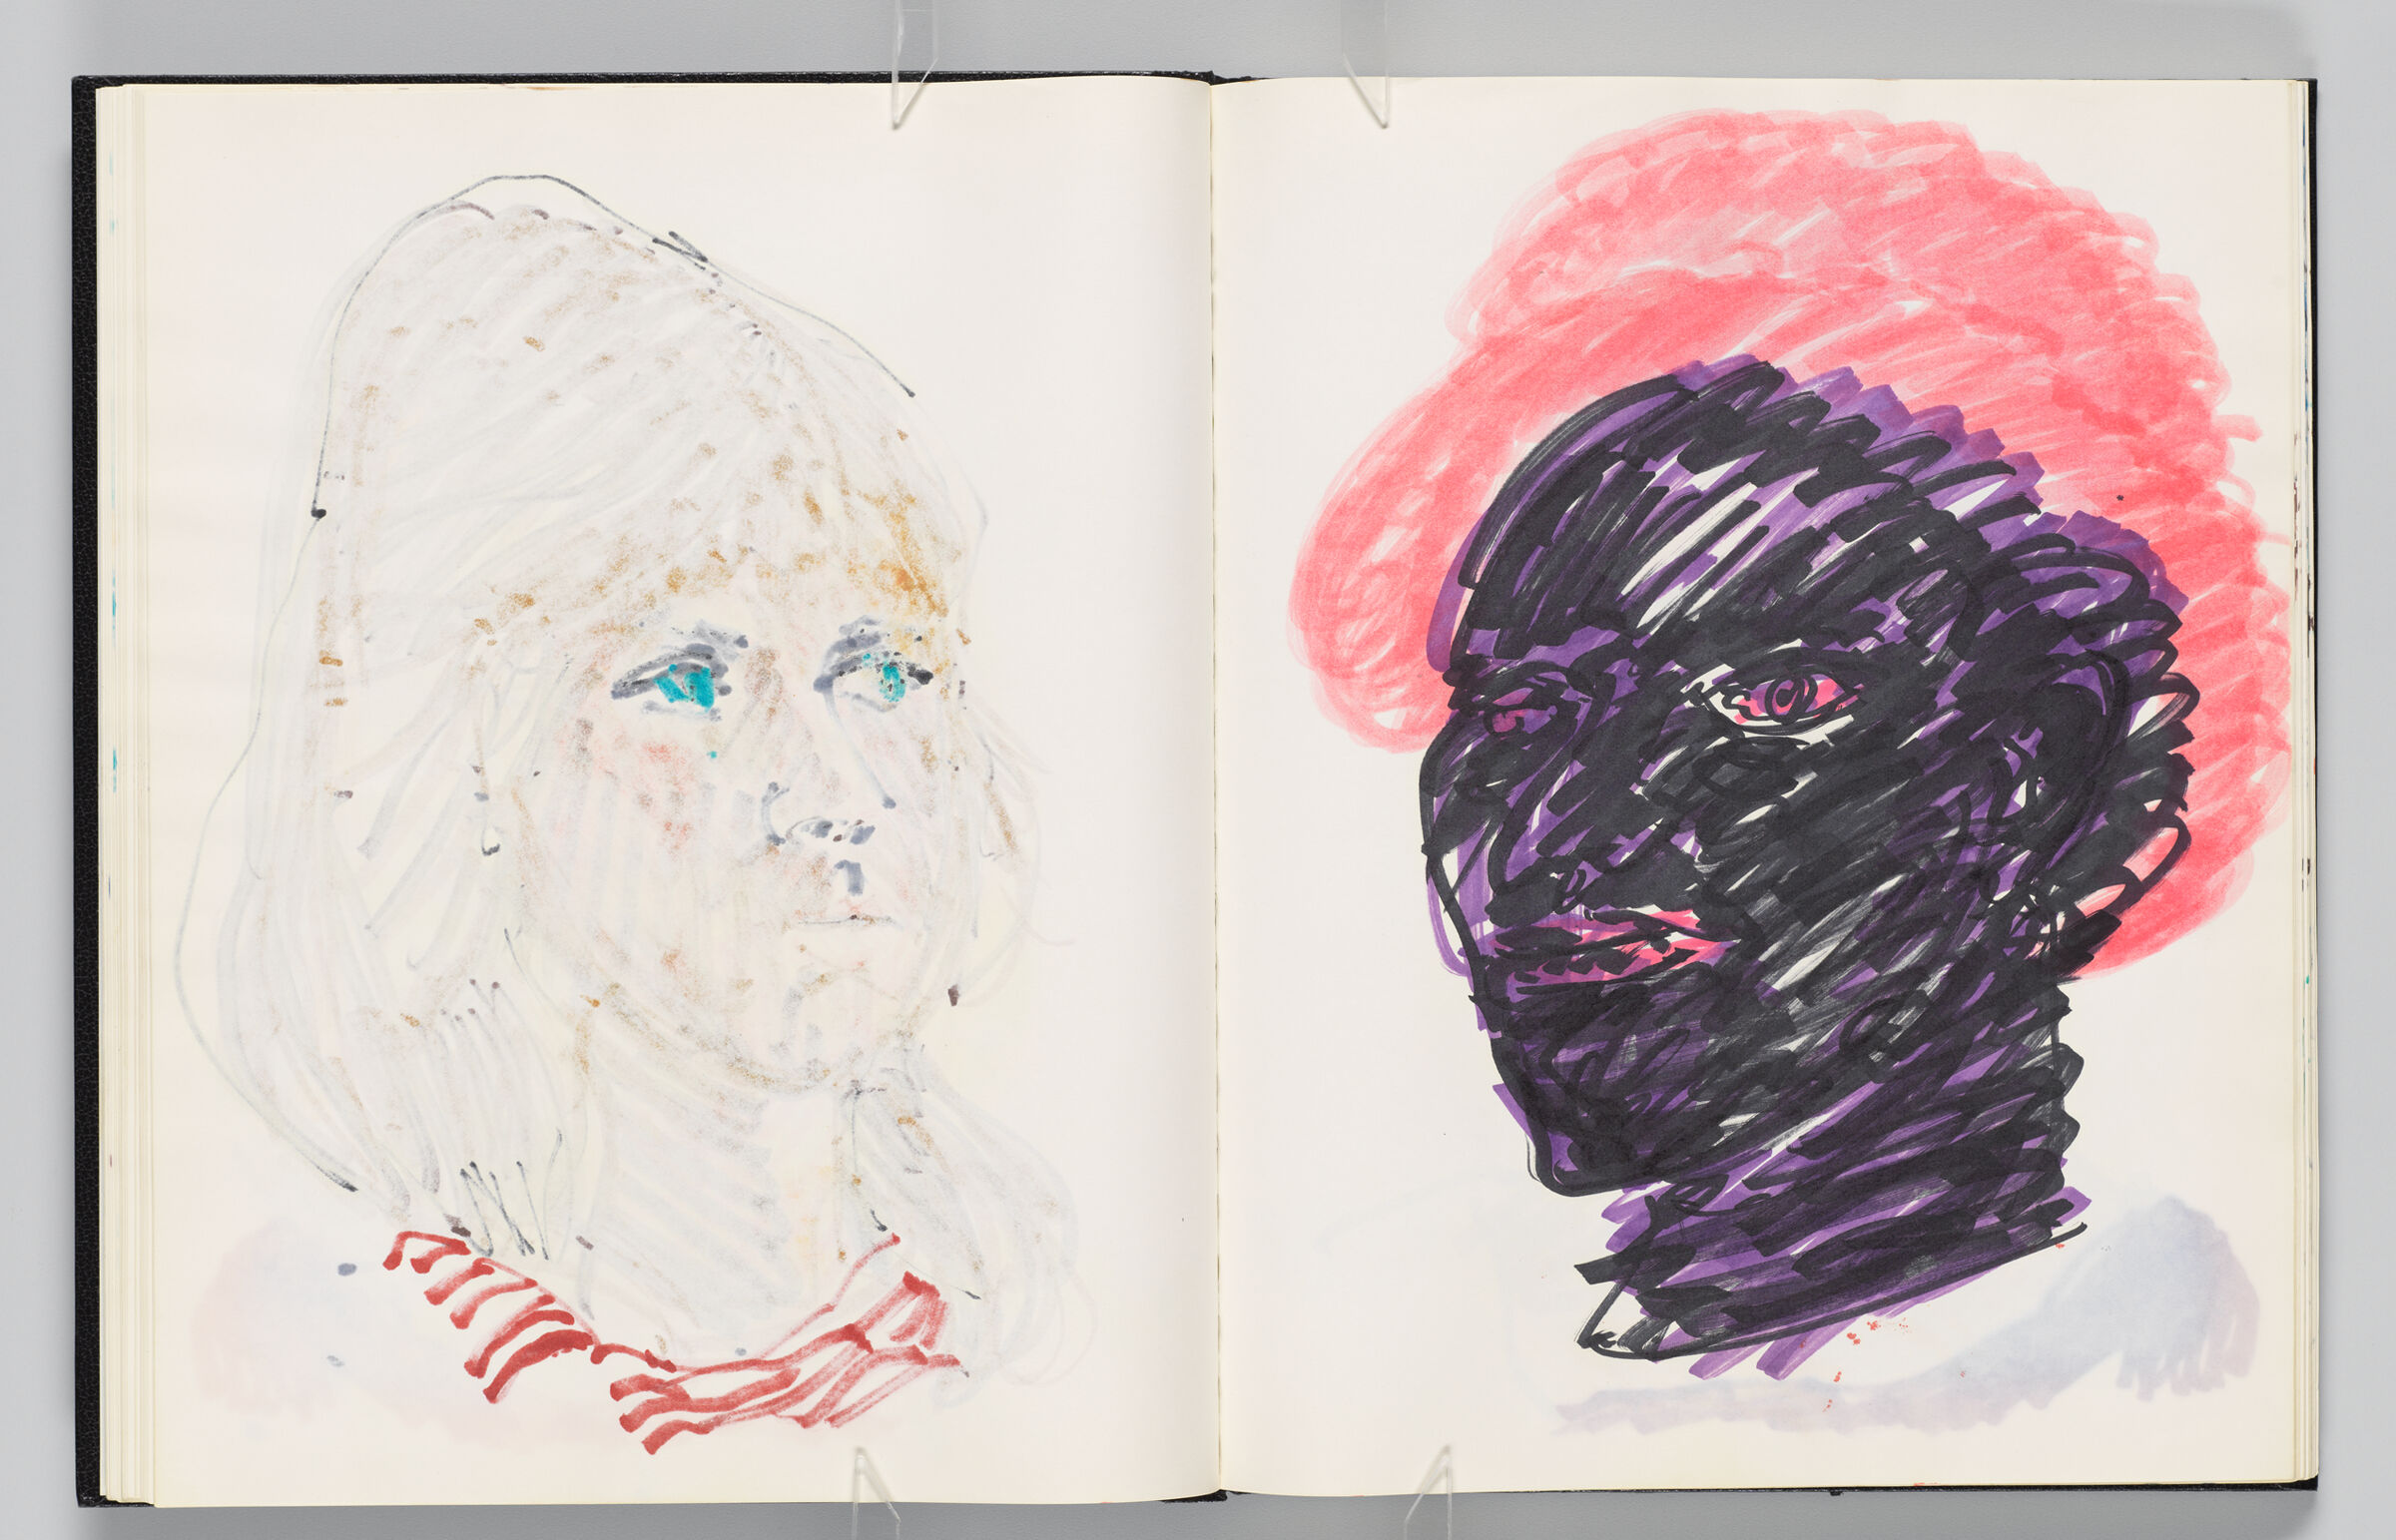 Untitled (Bleed-Through Of Previous Page, Left Page); Untitled (Portrait Of Male Figure, Right Page)